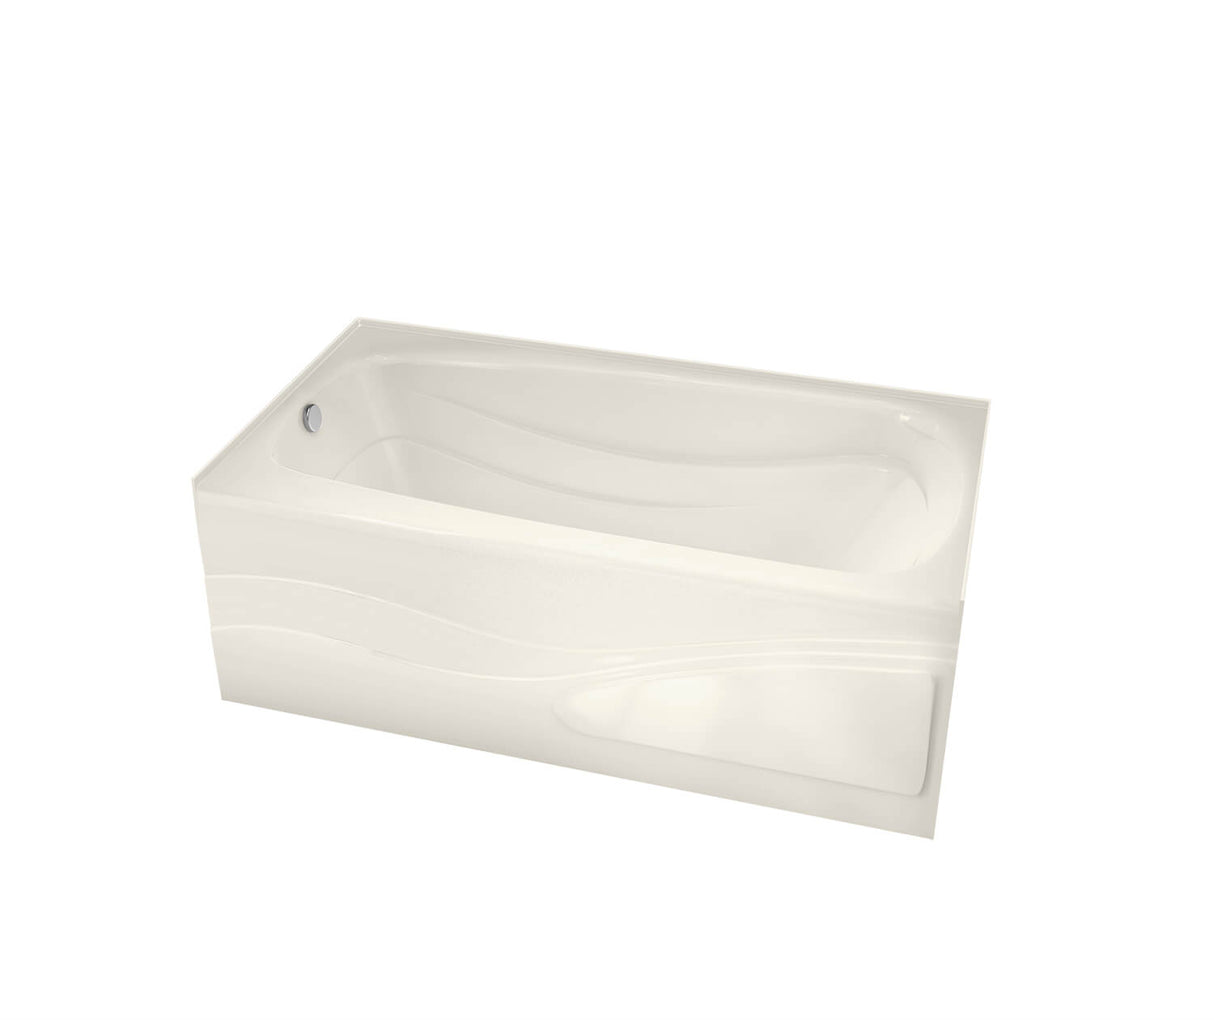 MAAX 102201-R-103-007 Tenderness 6032 Acrylic Alcove Right-Hand Drain Aeroeffect Bathtub in Biscuit